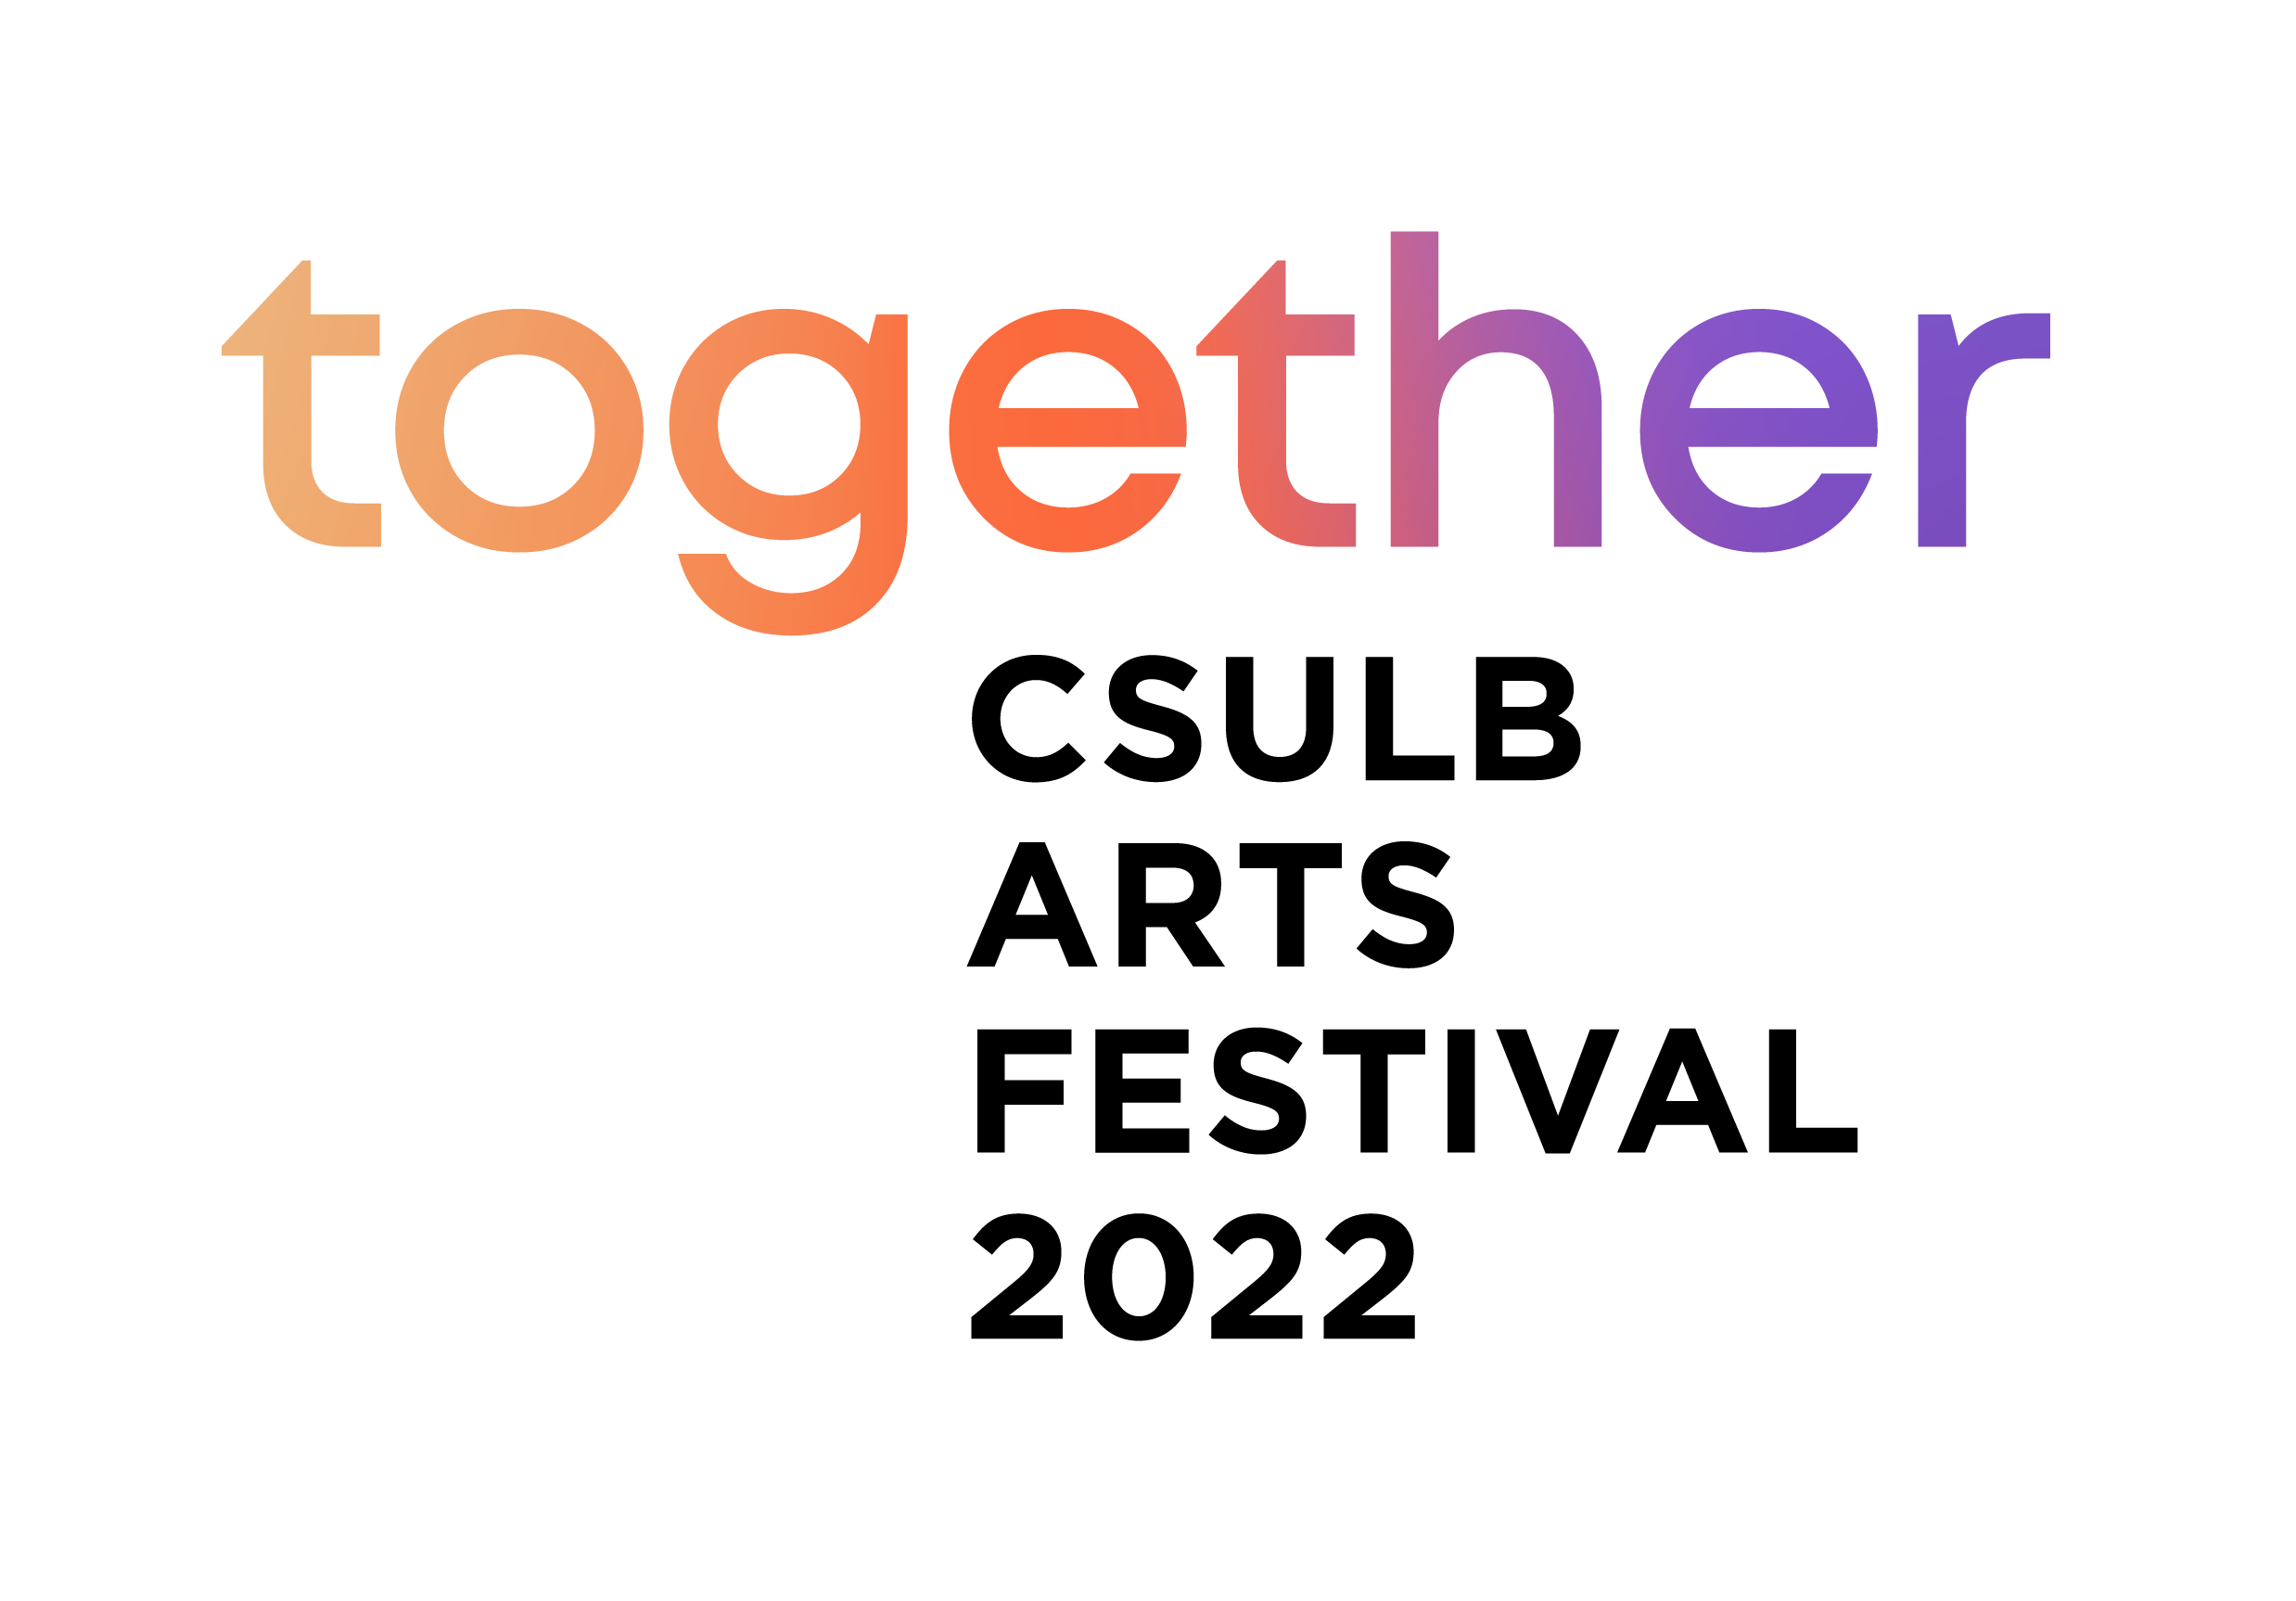 The Word Mark for the CSULB Arts Festival 2022: Together